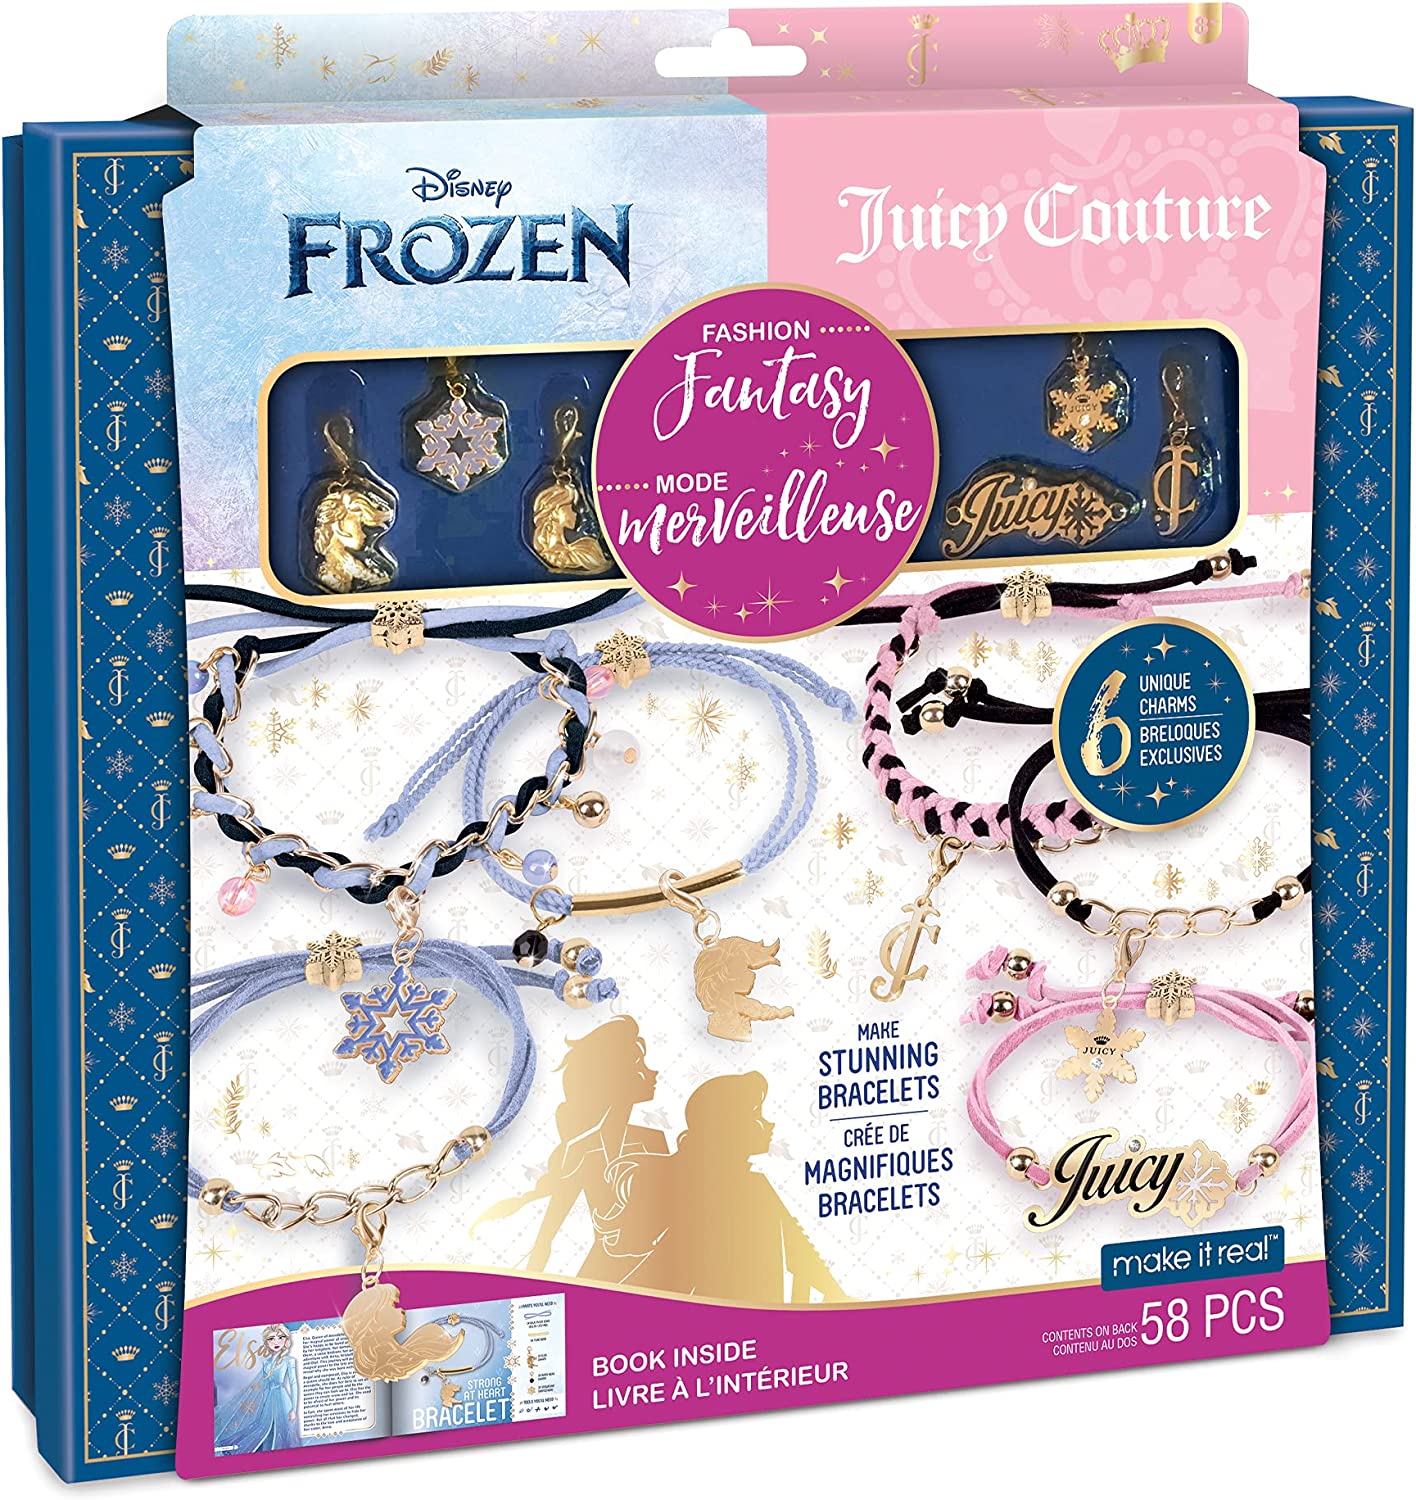 Make It Real Disney Frozen X Juicy Couture Bracelet Making Kit Including Elsa and Anna Charms Toys